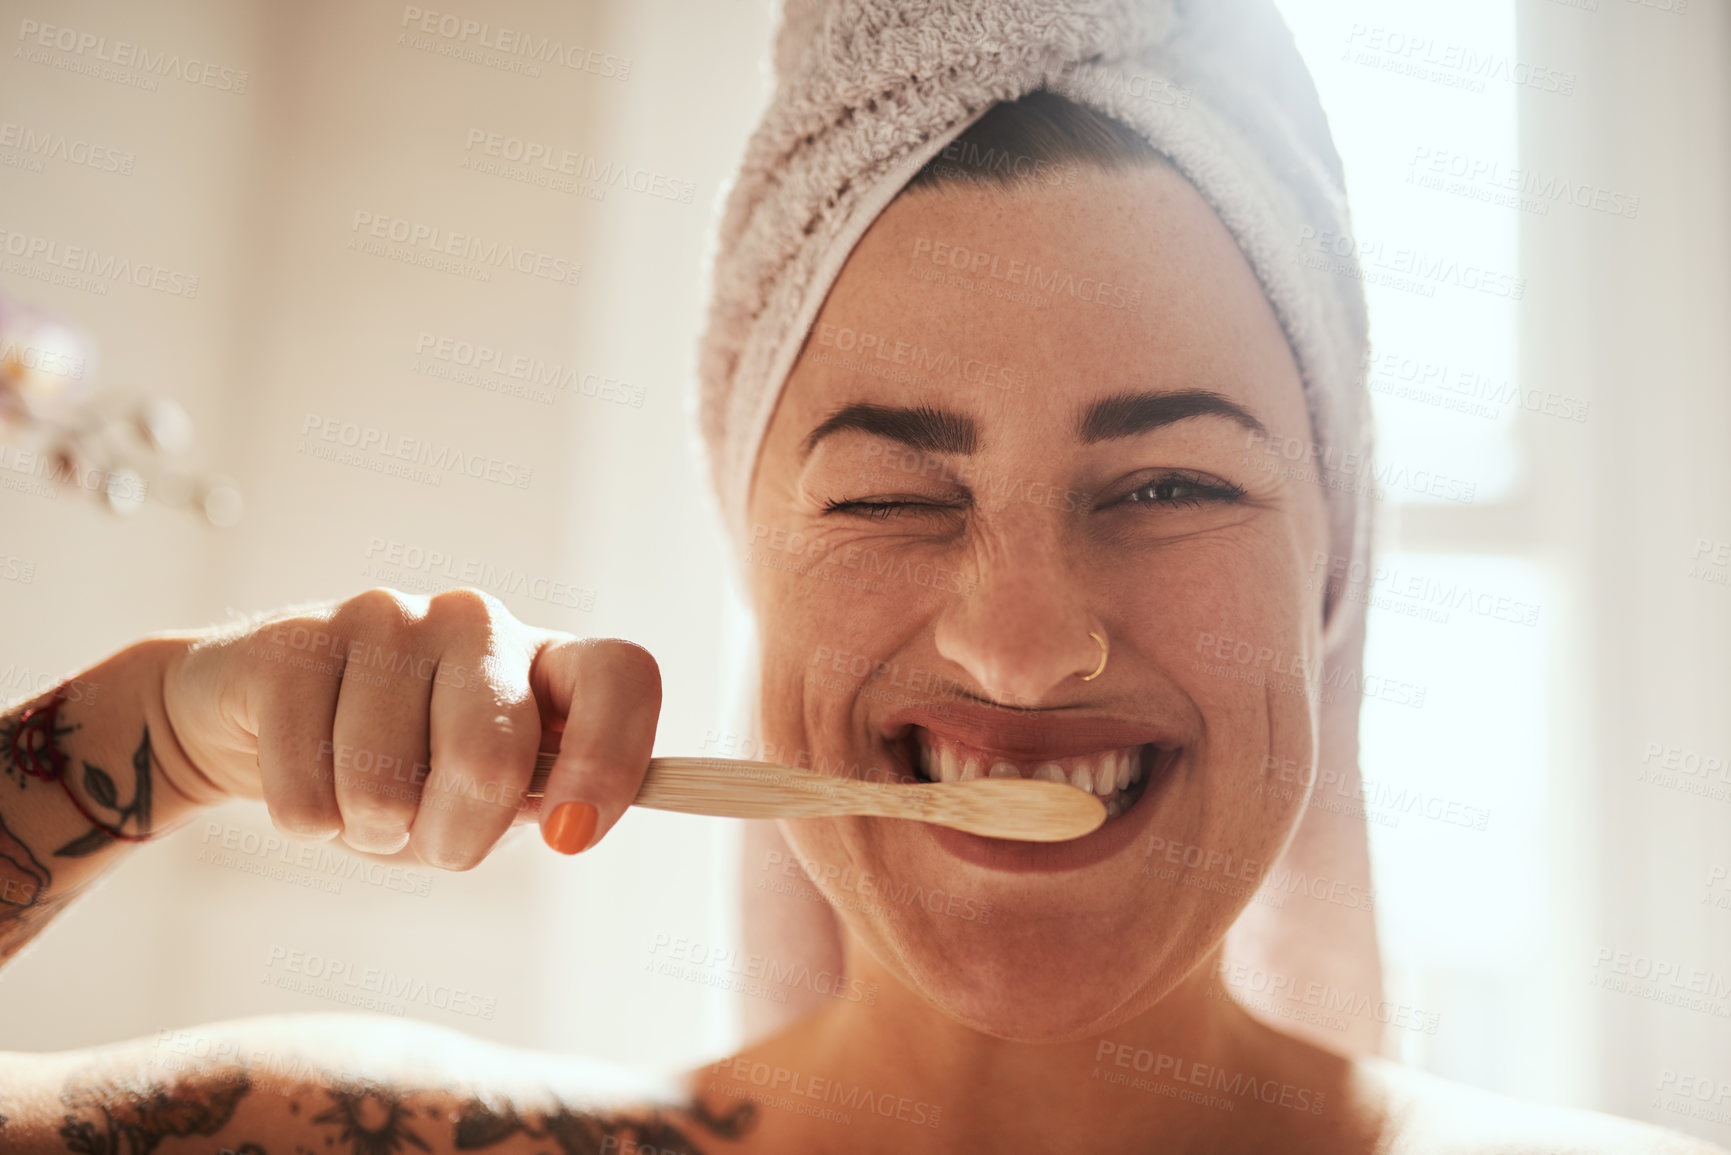 Buy stock photo Shot of an attractive young woman brushing her teeth in the bathroom at home